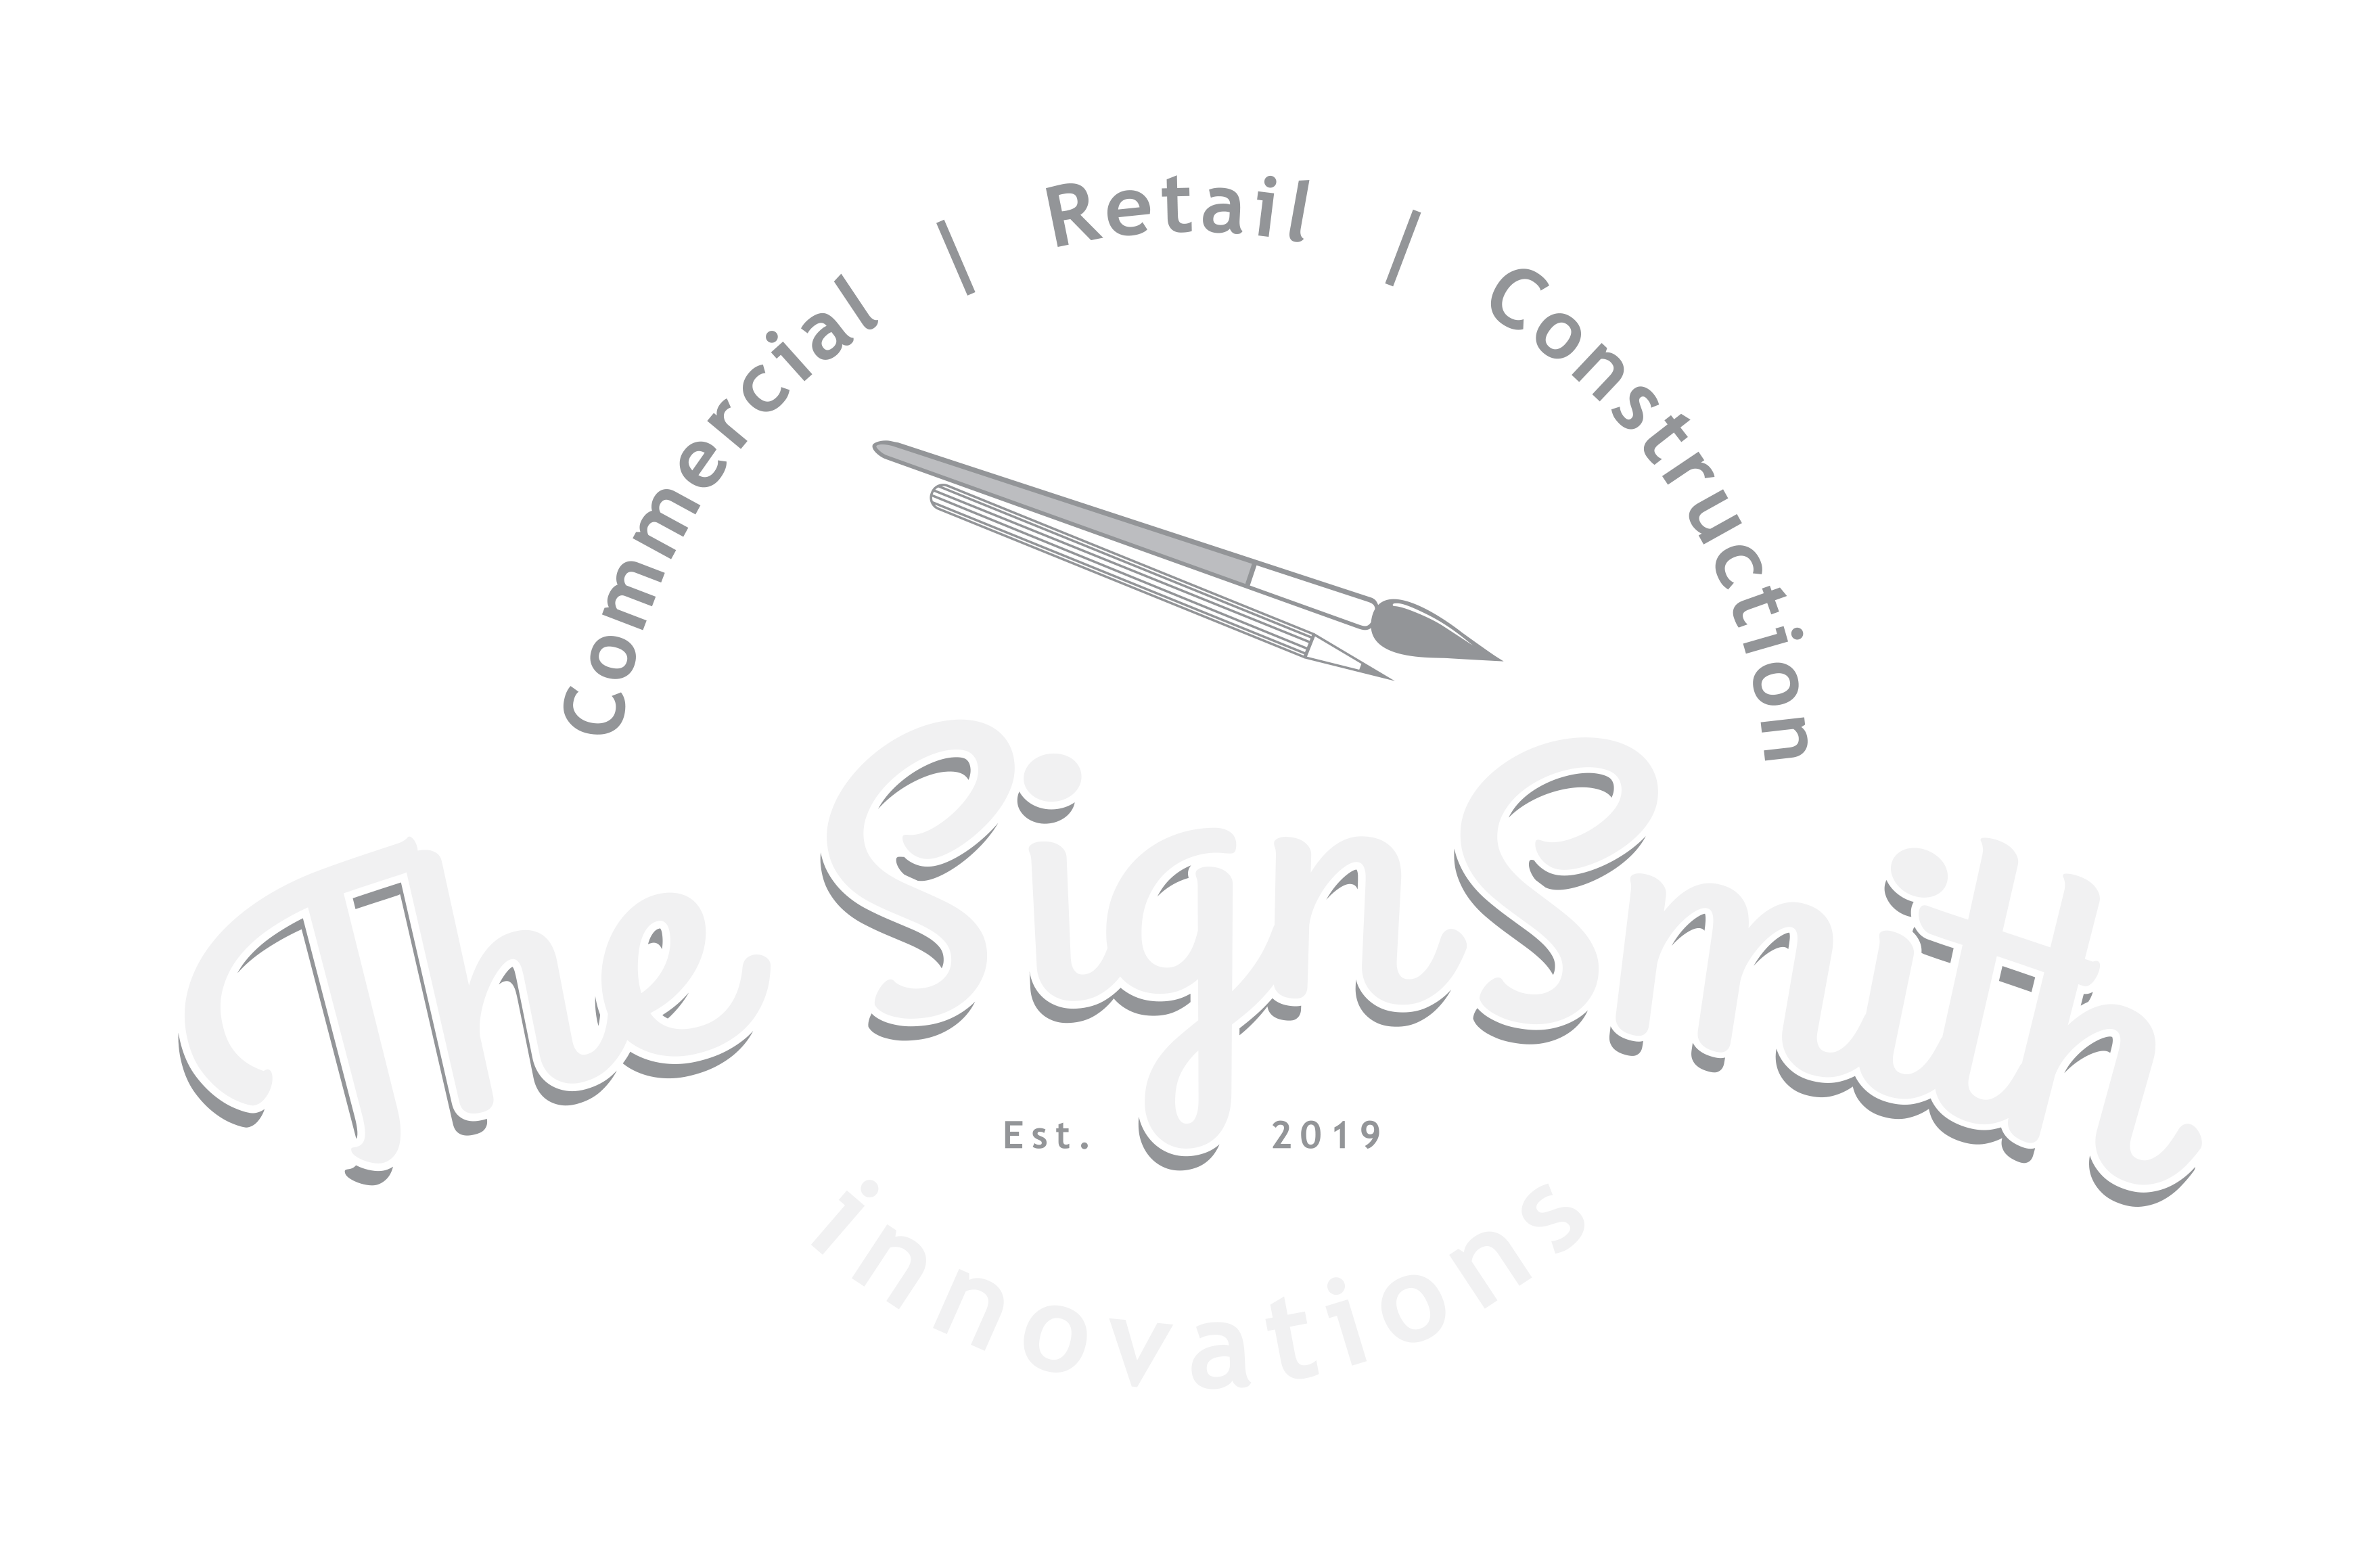 The Sign Smith